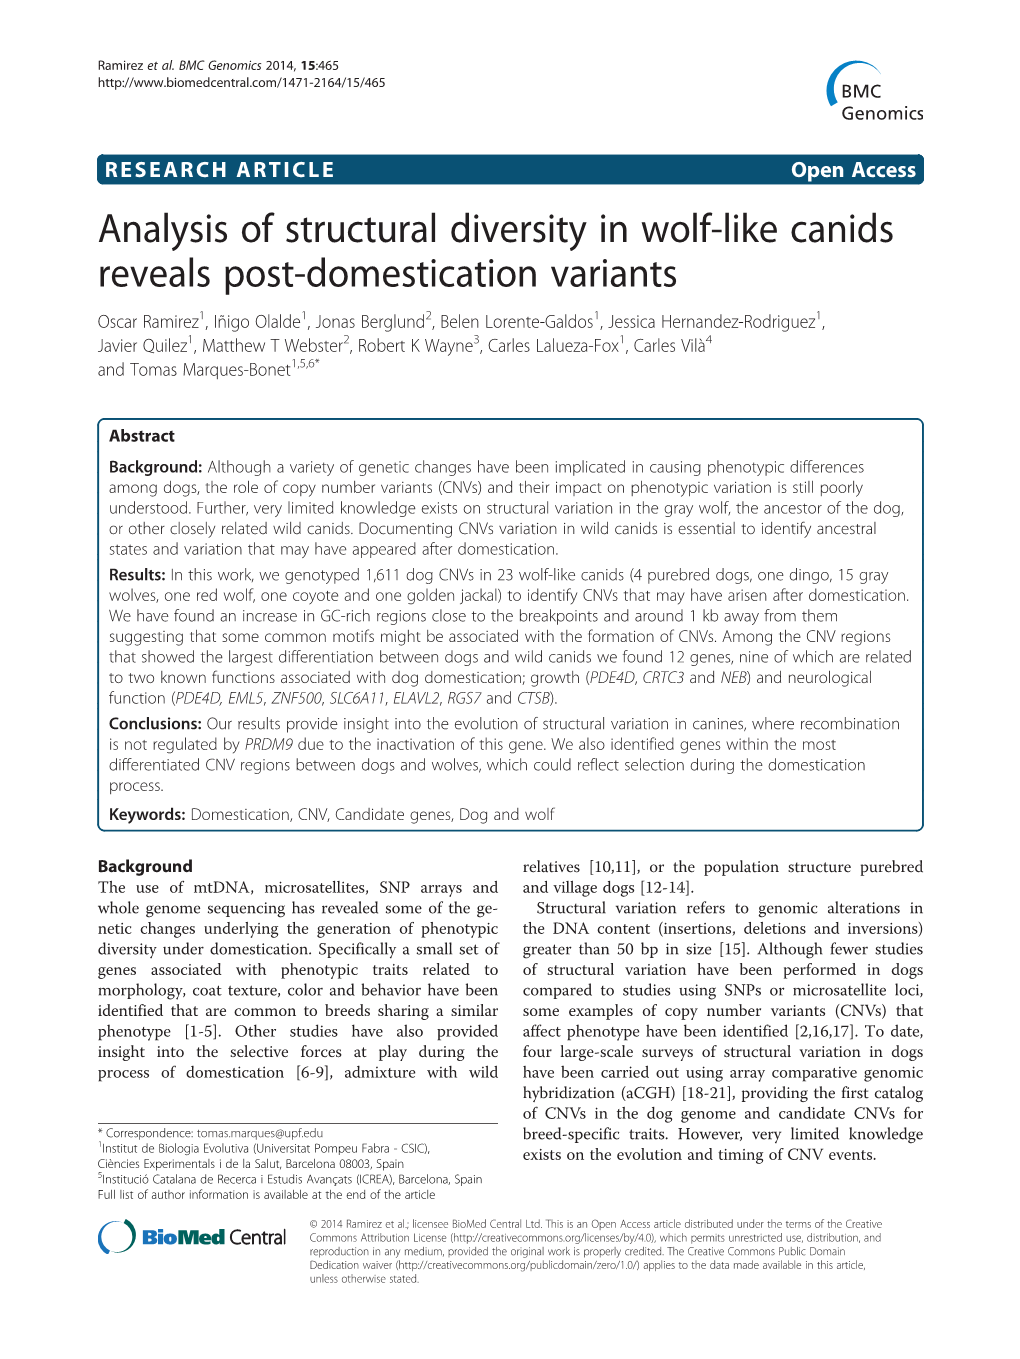 Analysis of Structural Diversity in Wolf-Like Canids Reveals Post